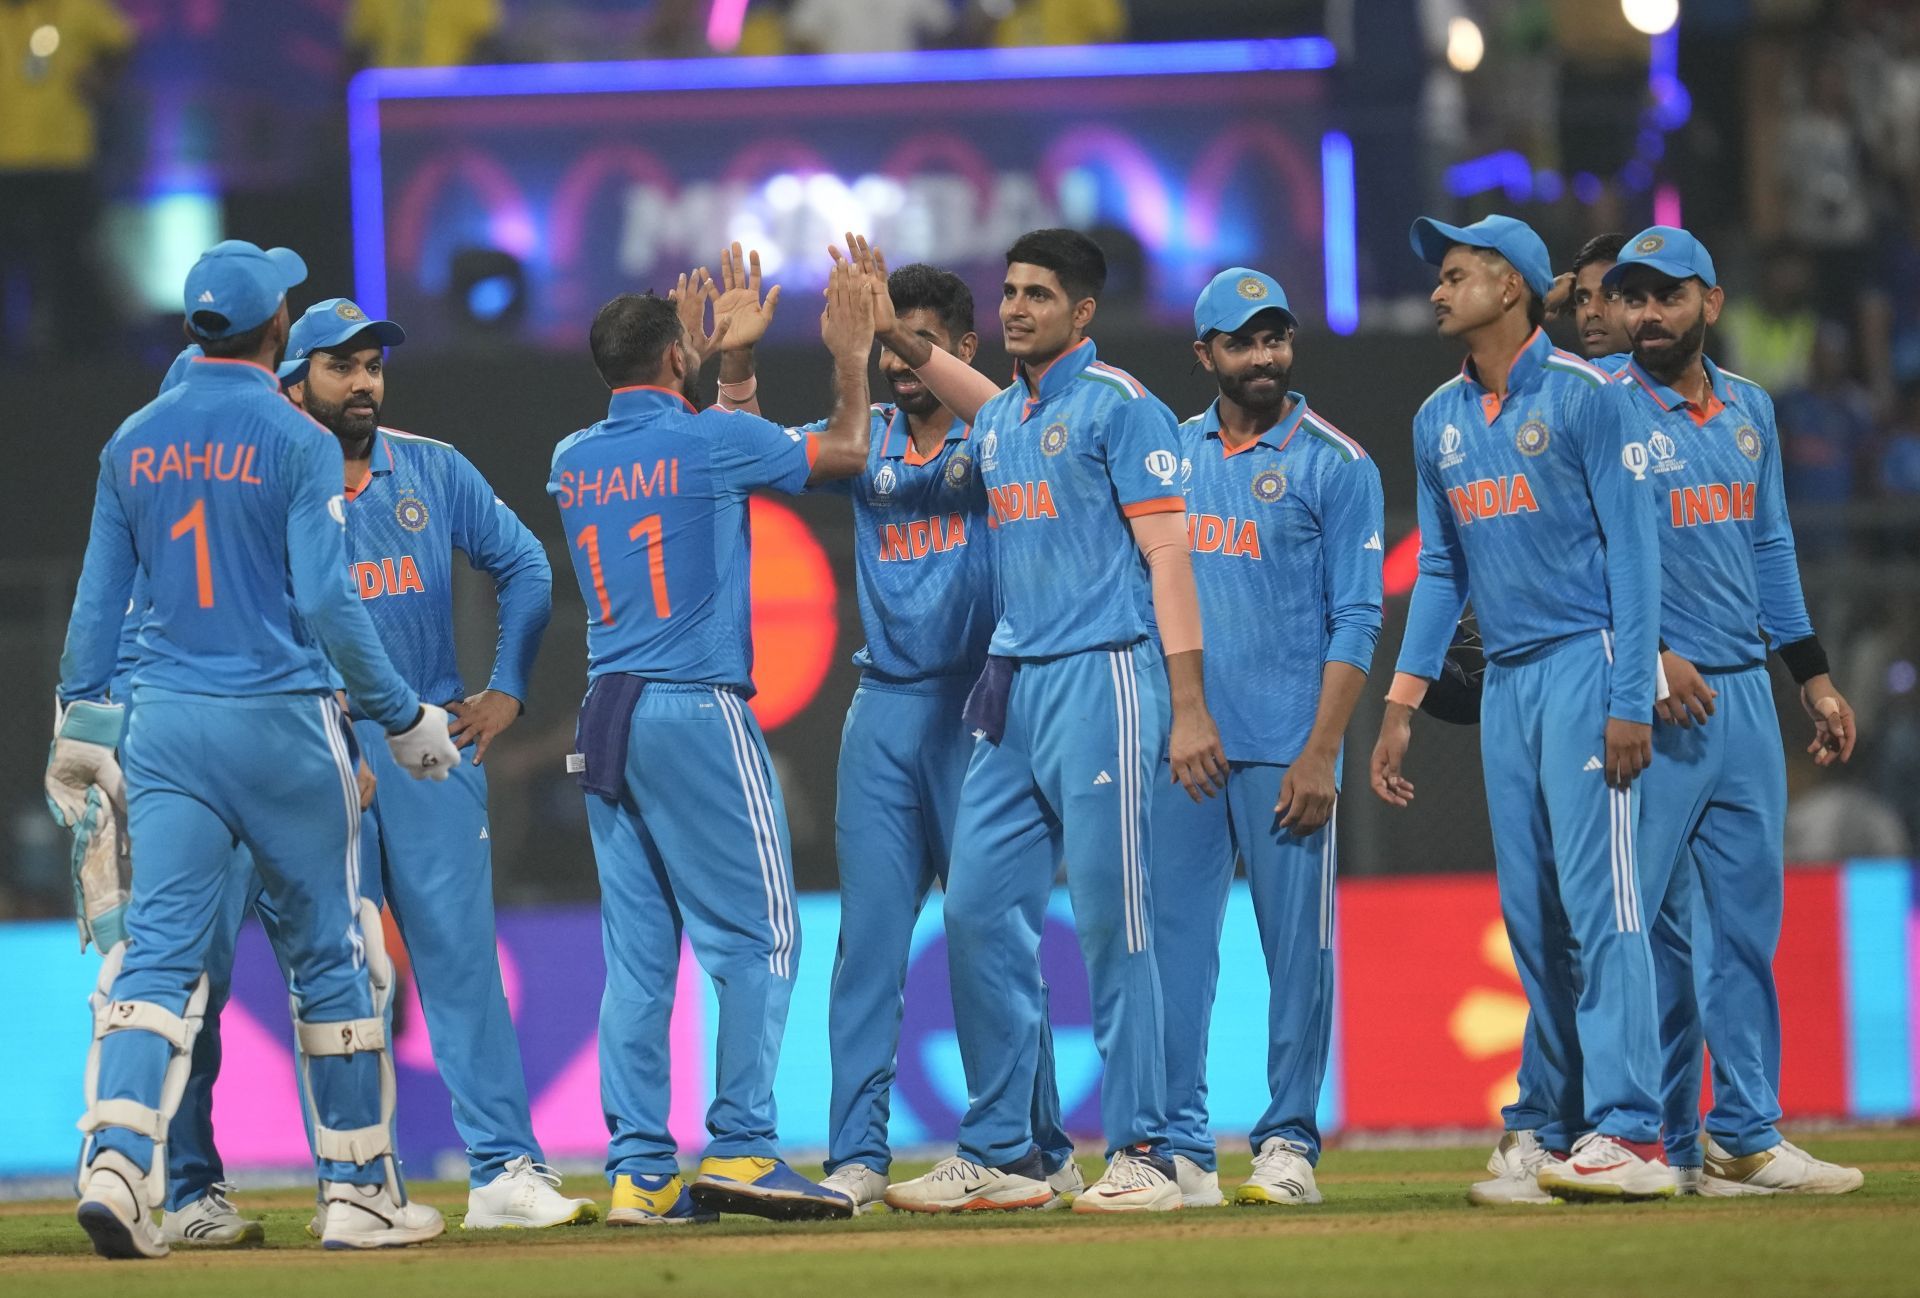 India have brushed aside oppositions with ease.